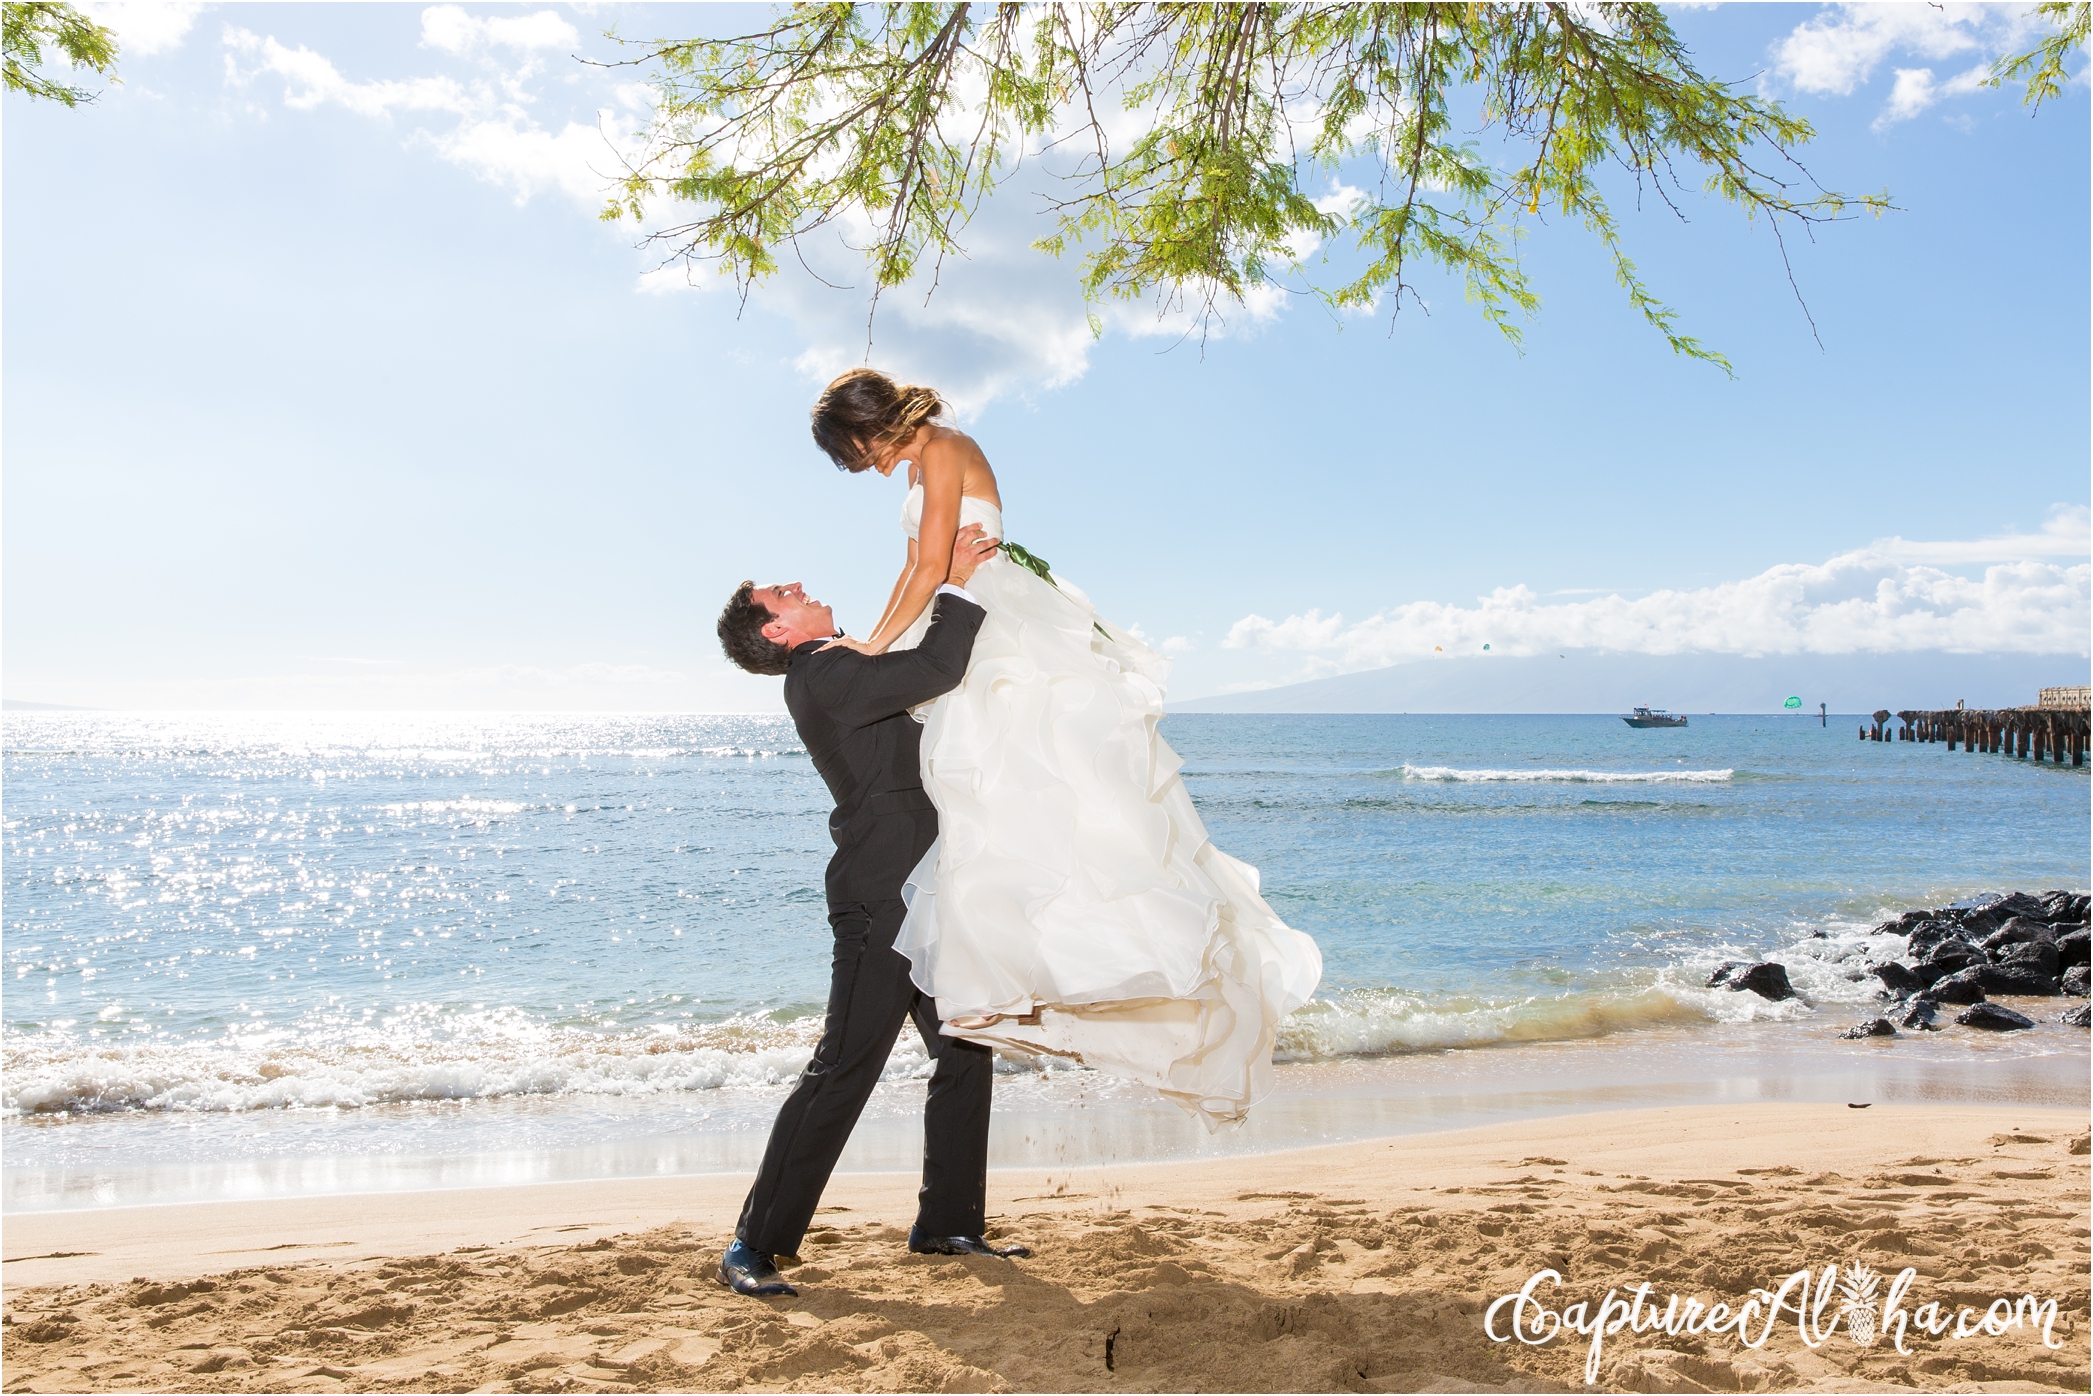 Maui Wedding Photography at the beach with the bride and groom